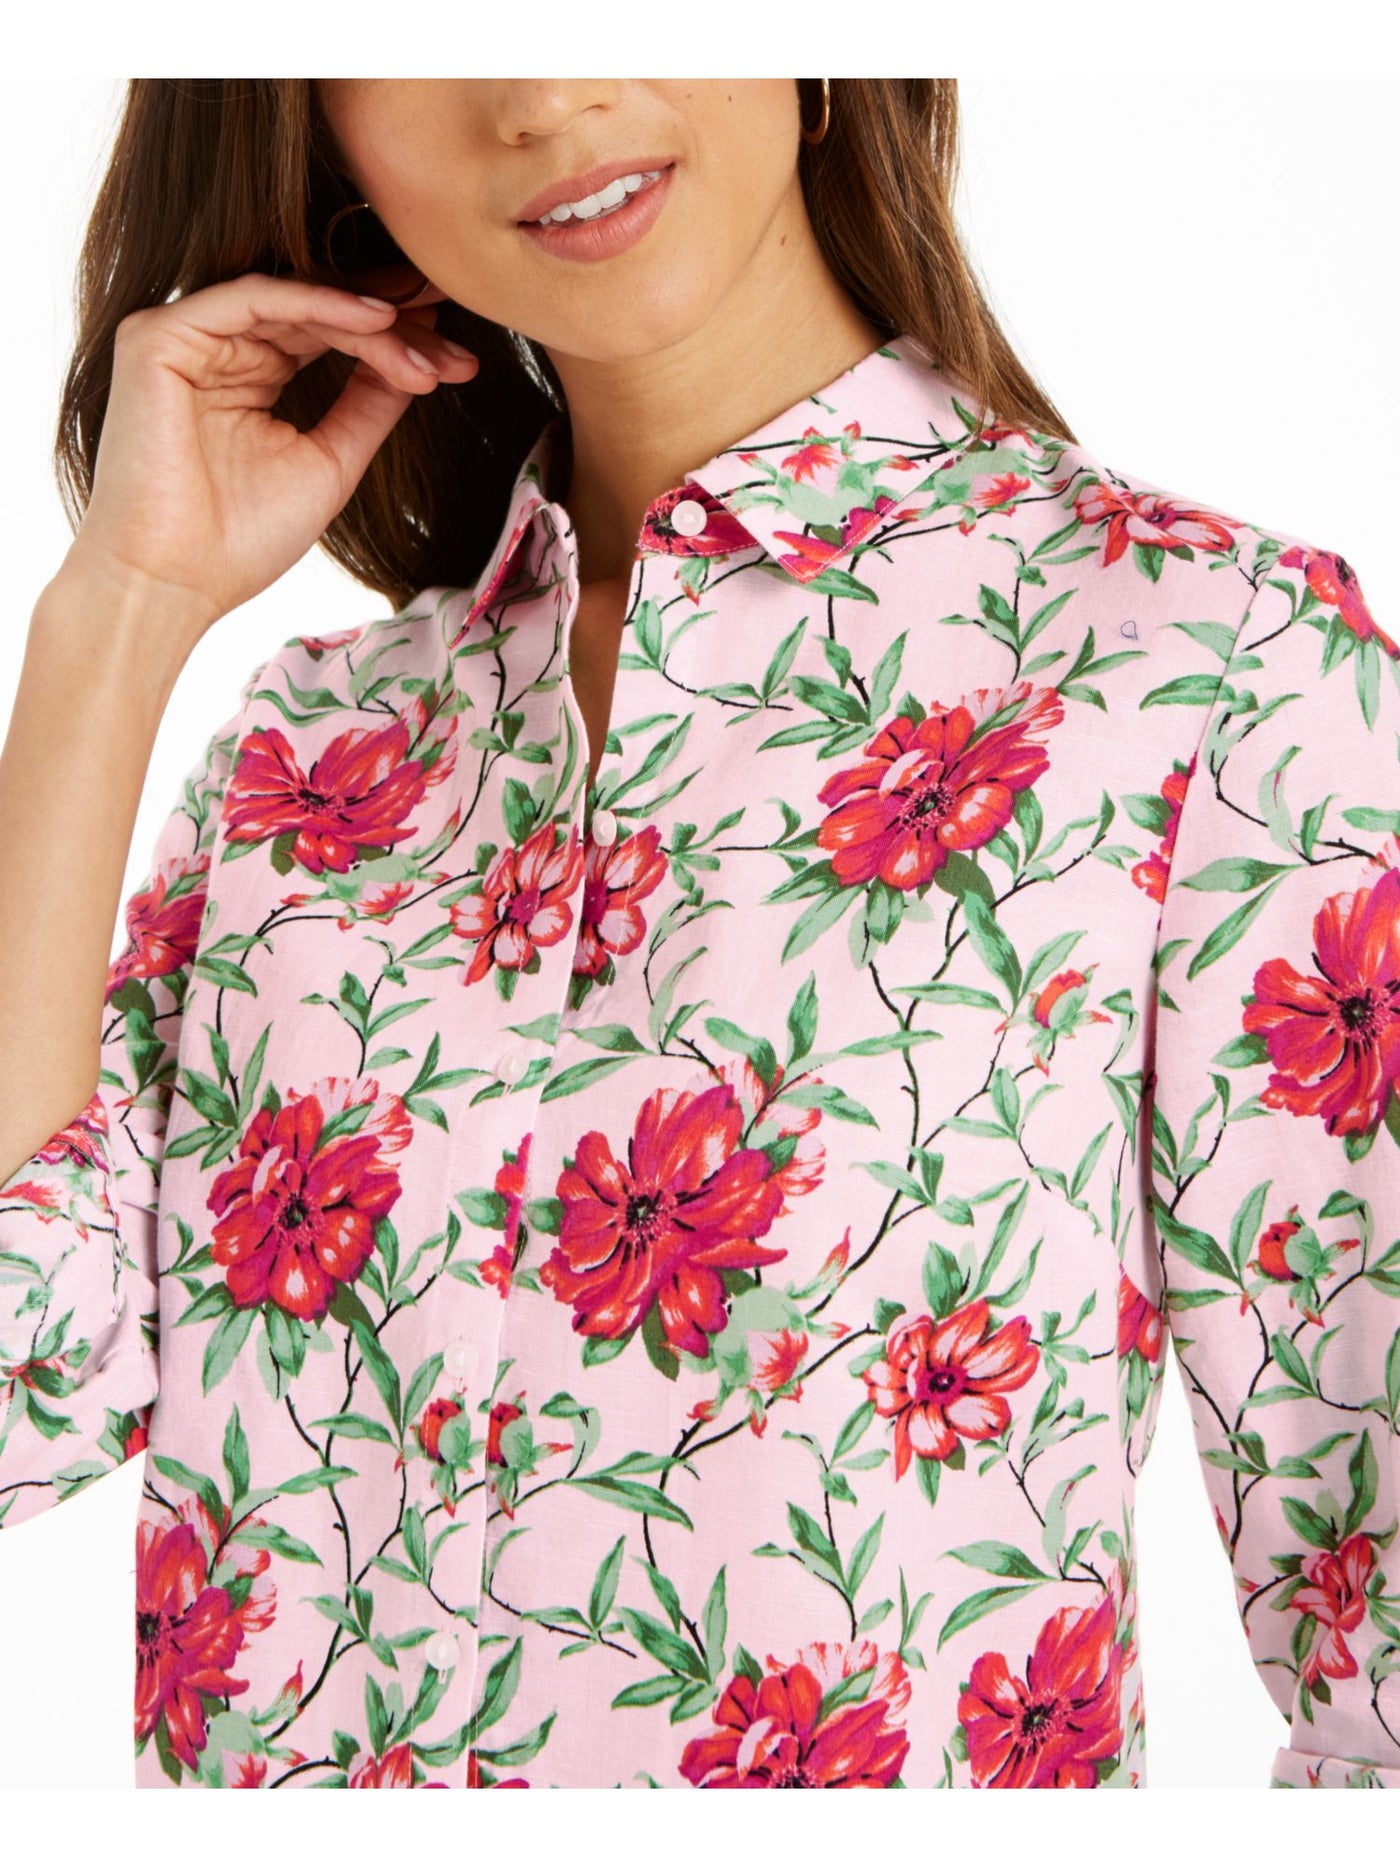 CHARTER CLUB Womens Pink Floral Roll-tab Collared Button Up Top M